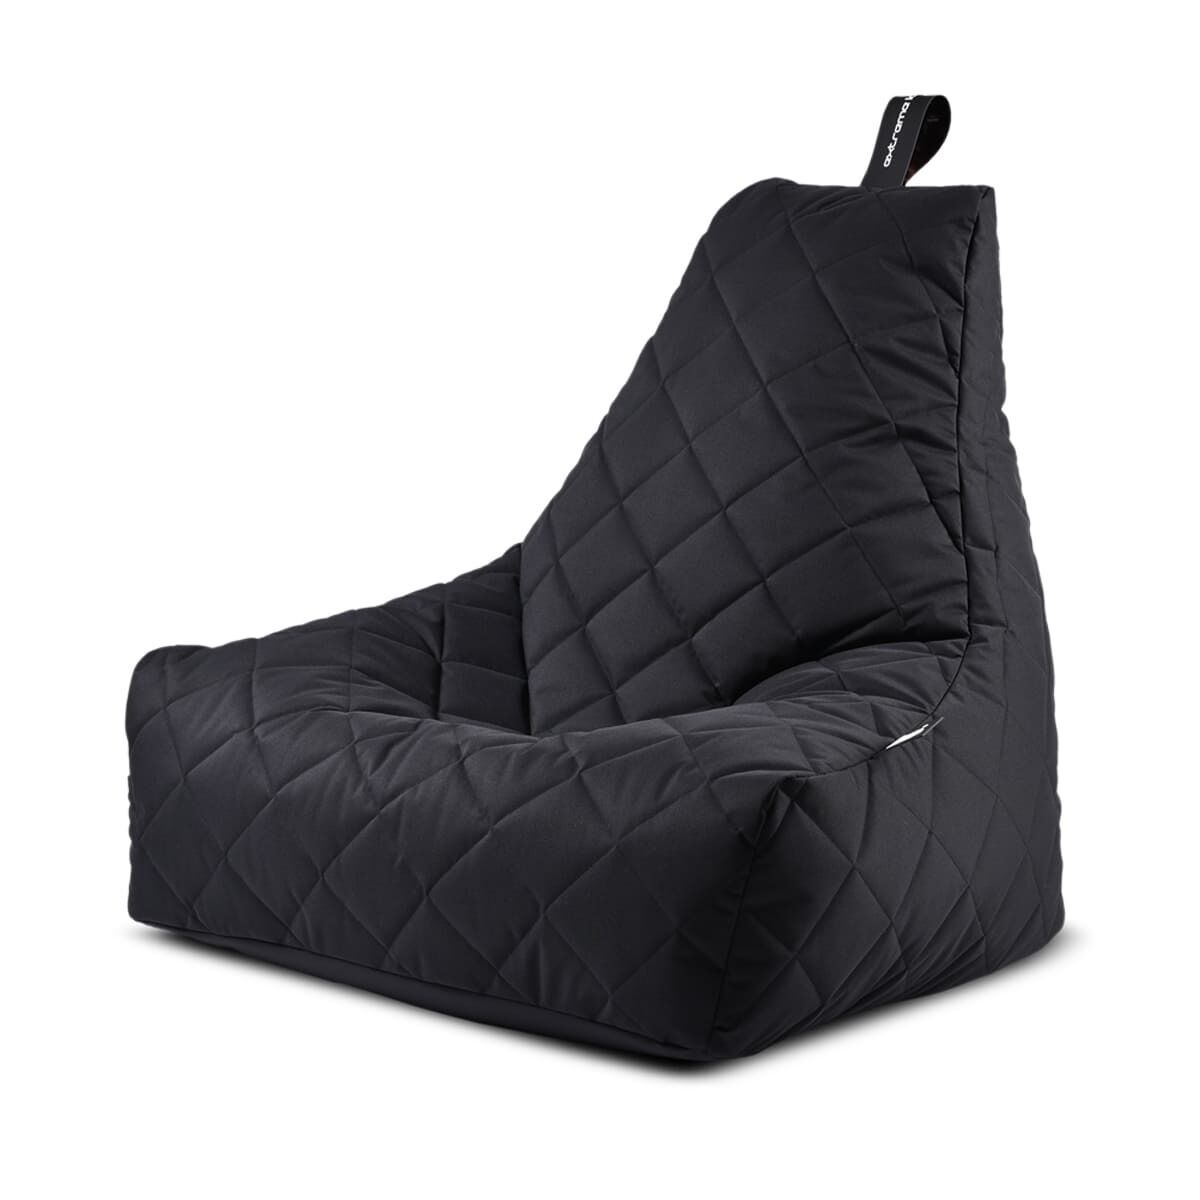 Extreme Lounging - Mighty Quilted Bean Bag - Black product image